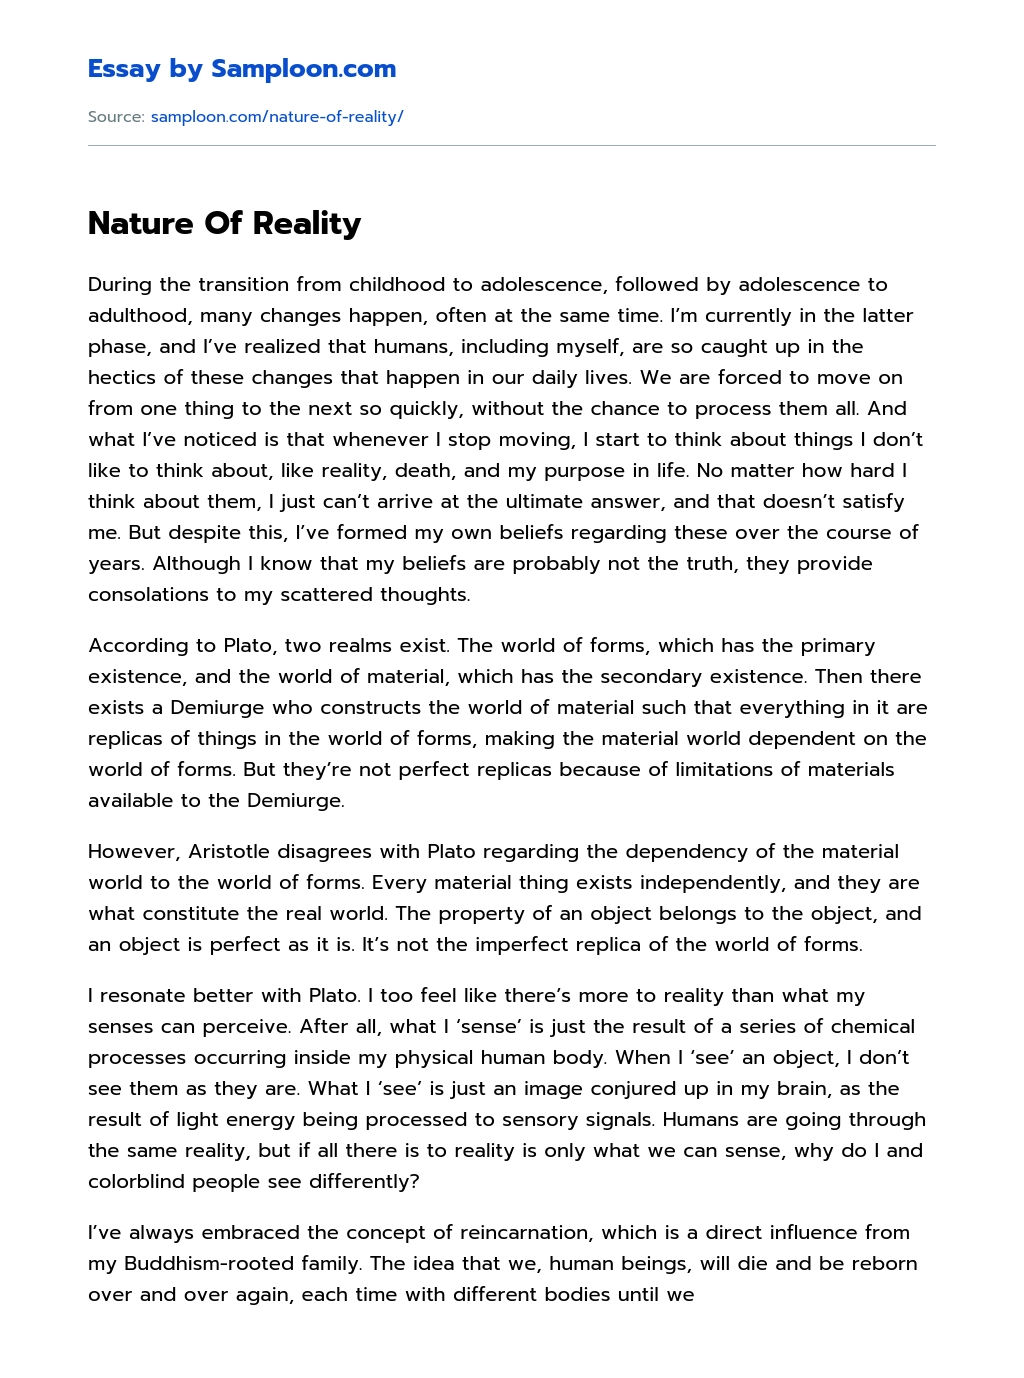 Nature Of Reality Critical Essay essay